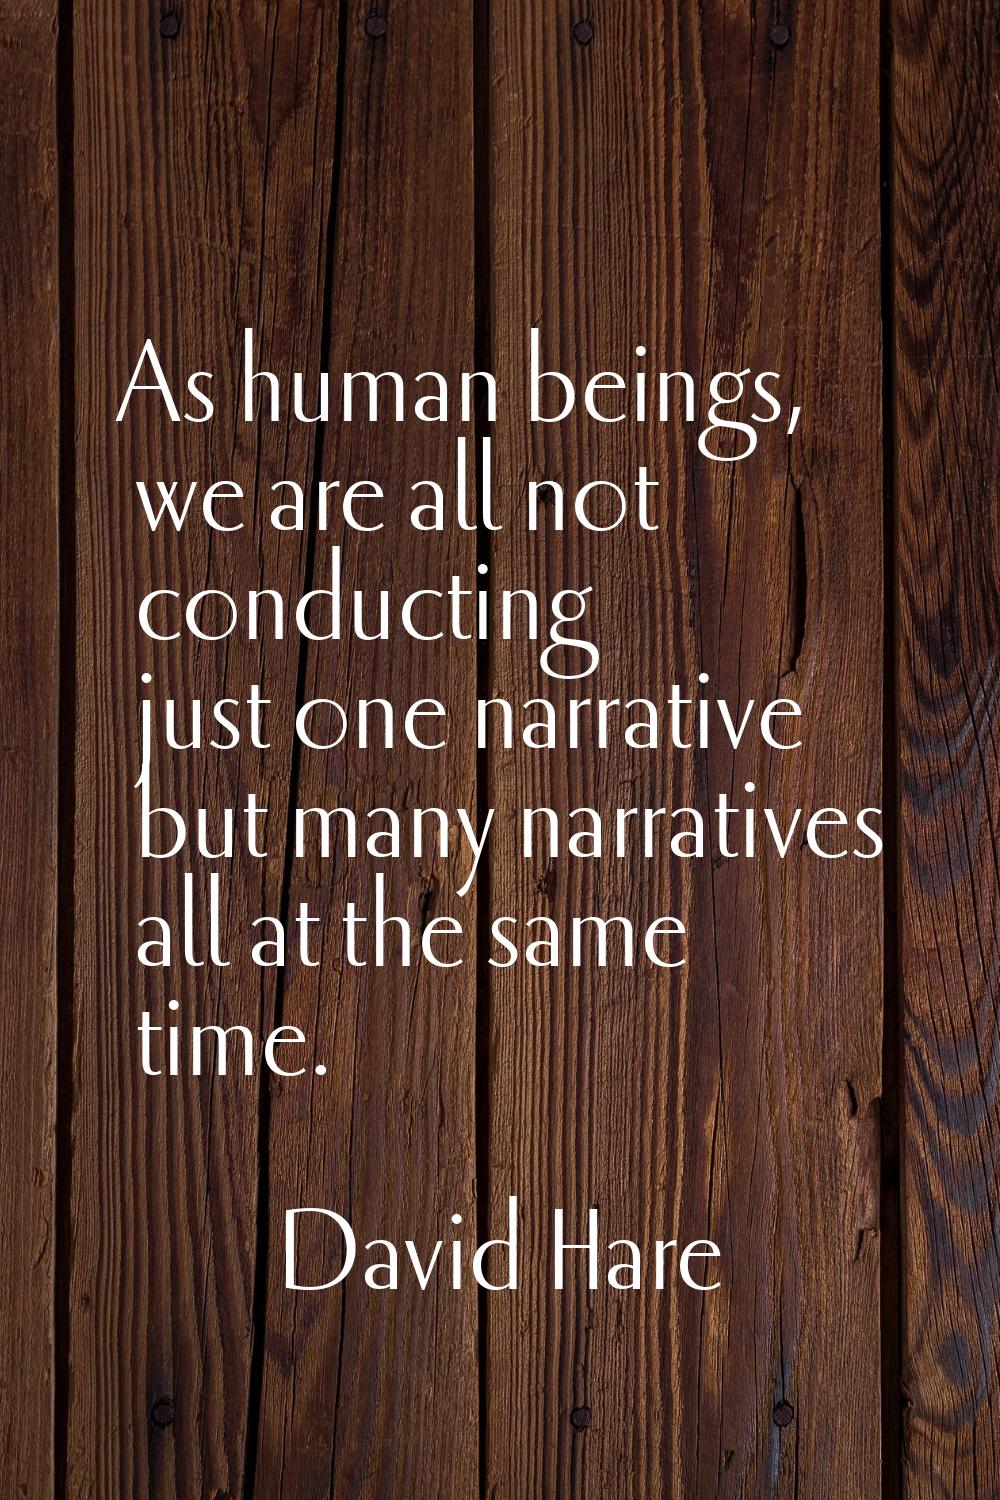 As human beings, we are all not conducting just one narrative but many narratives all at the same t